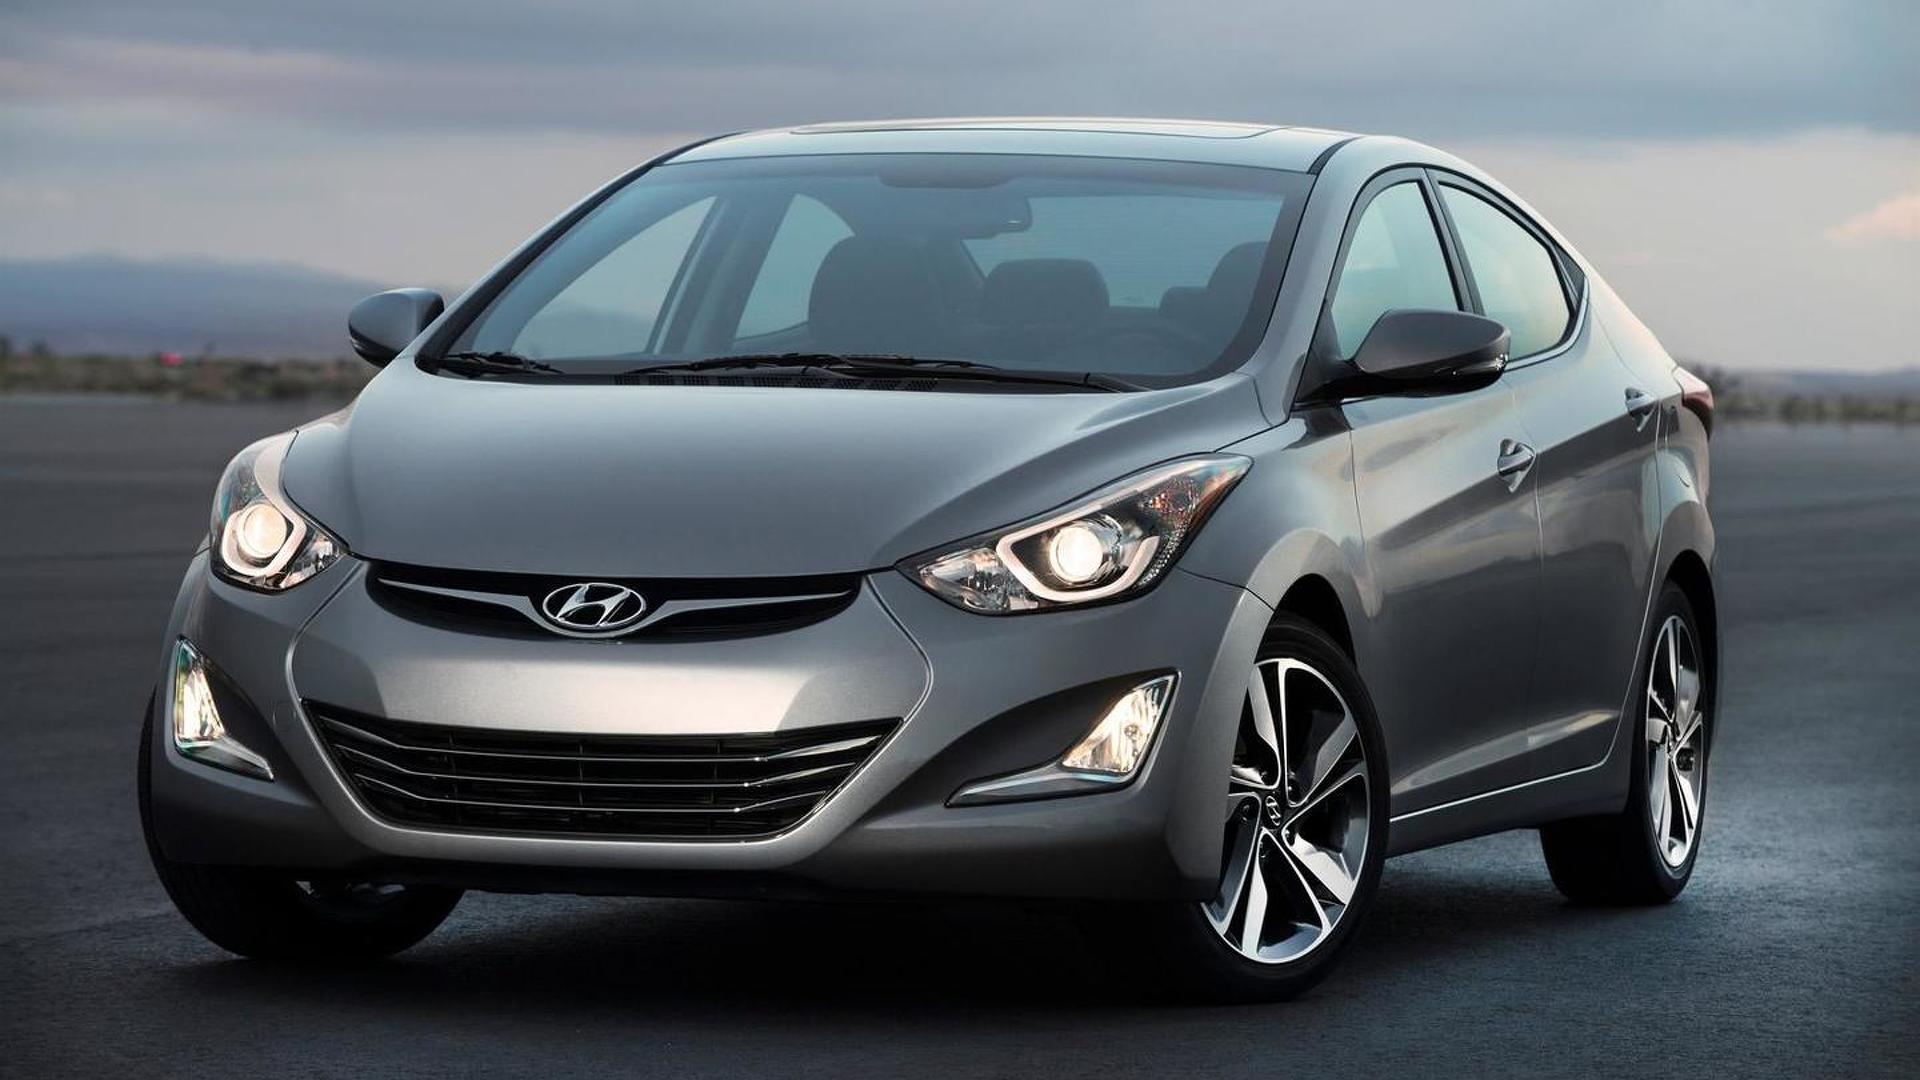 Over 38,000 Vehicles from Hyundai, BMW, and Jaguar Recalled Due to Safety Concerns